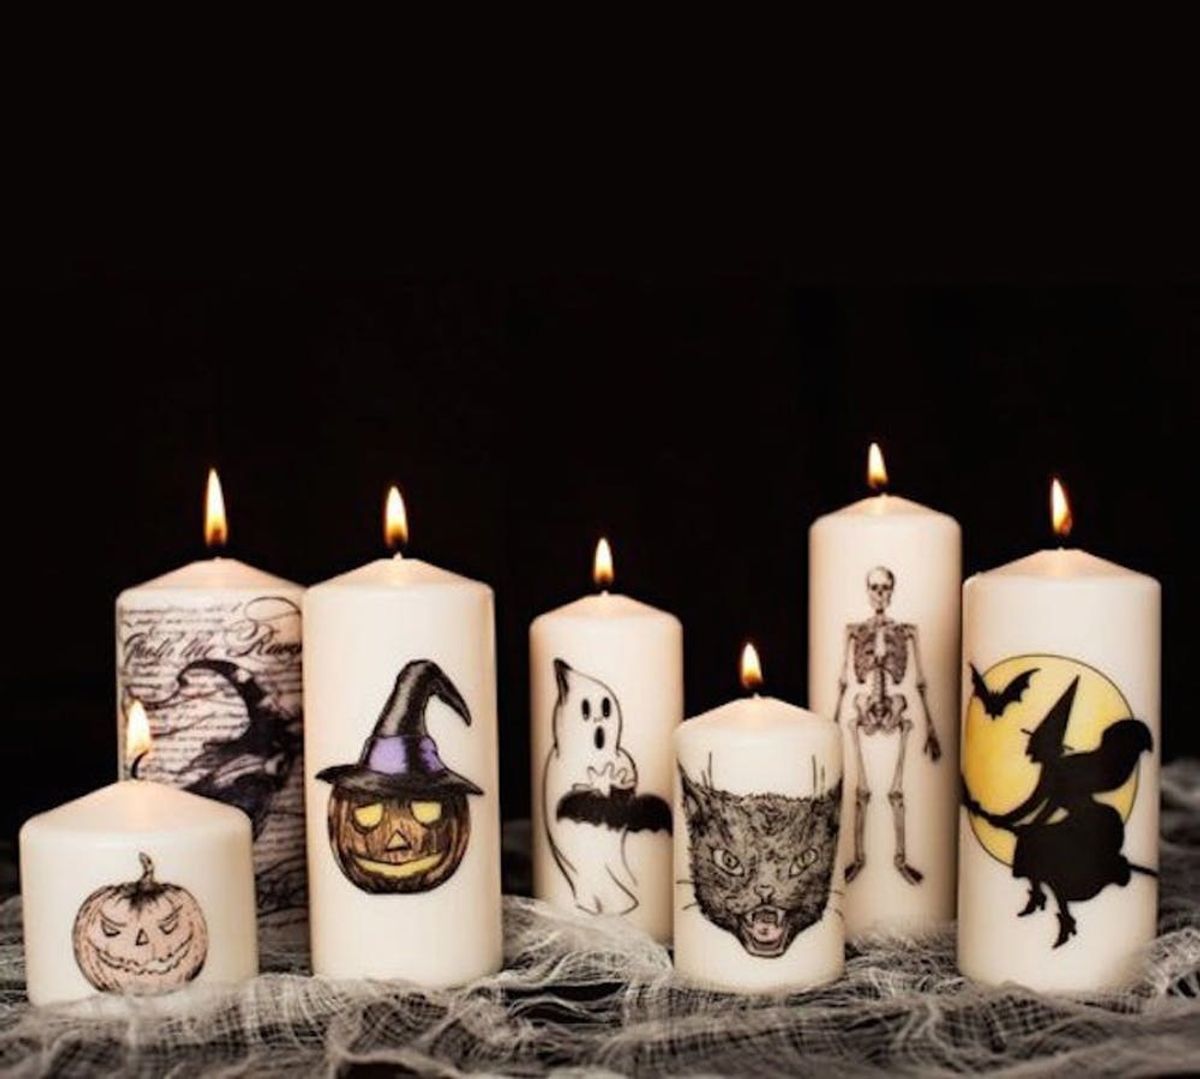 14 Spooky Halloween Candles to DIY